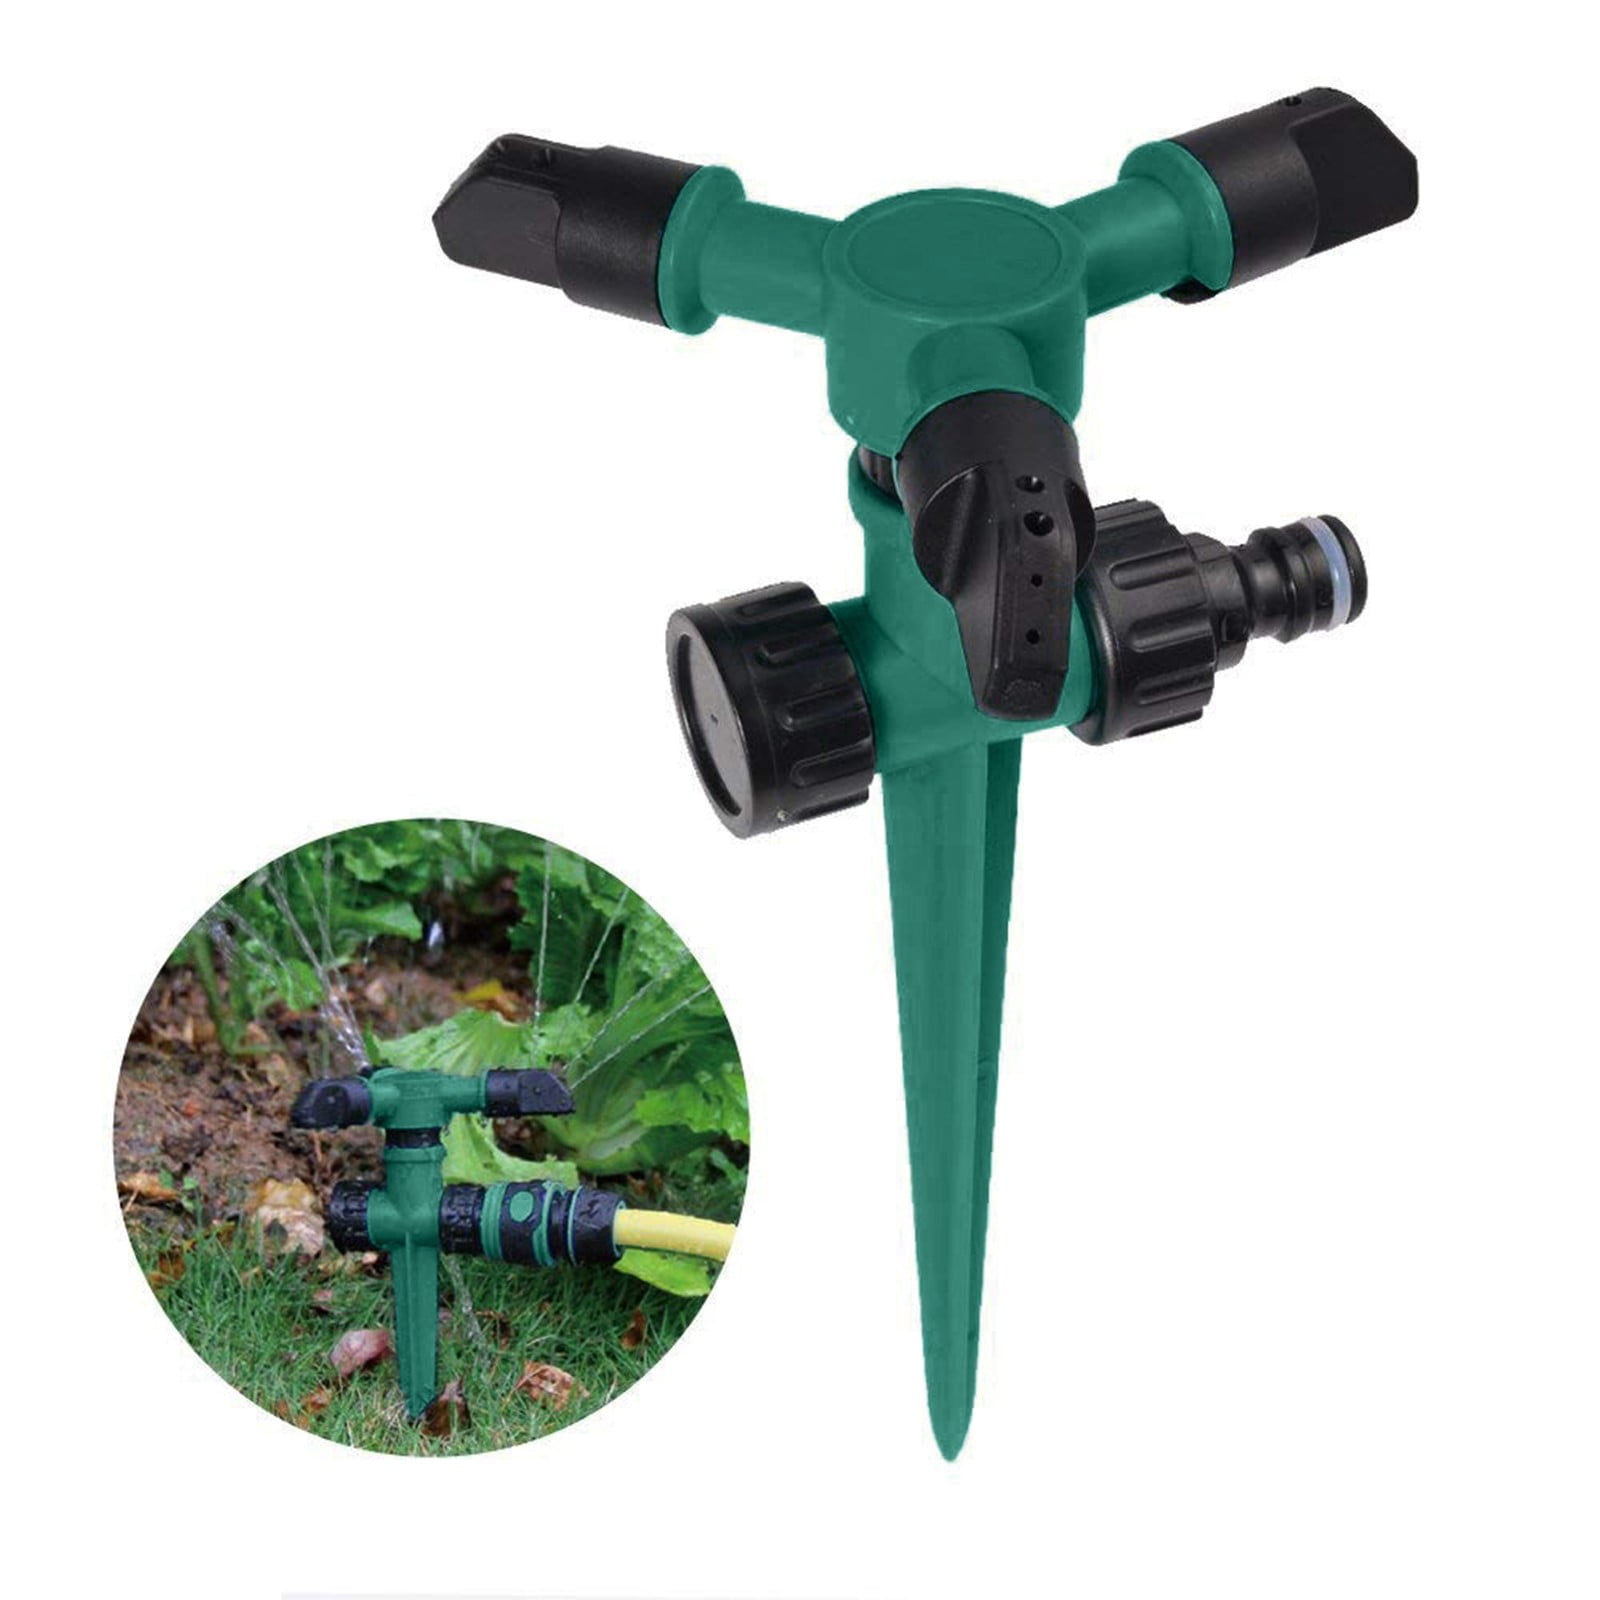 360° Rotating Lawn Sprinkler System Automatic Grass Watering Spray Irrigation US 